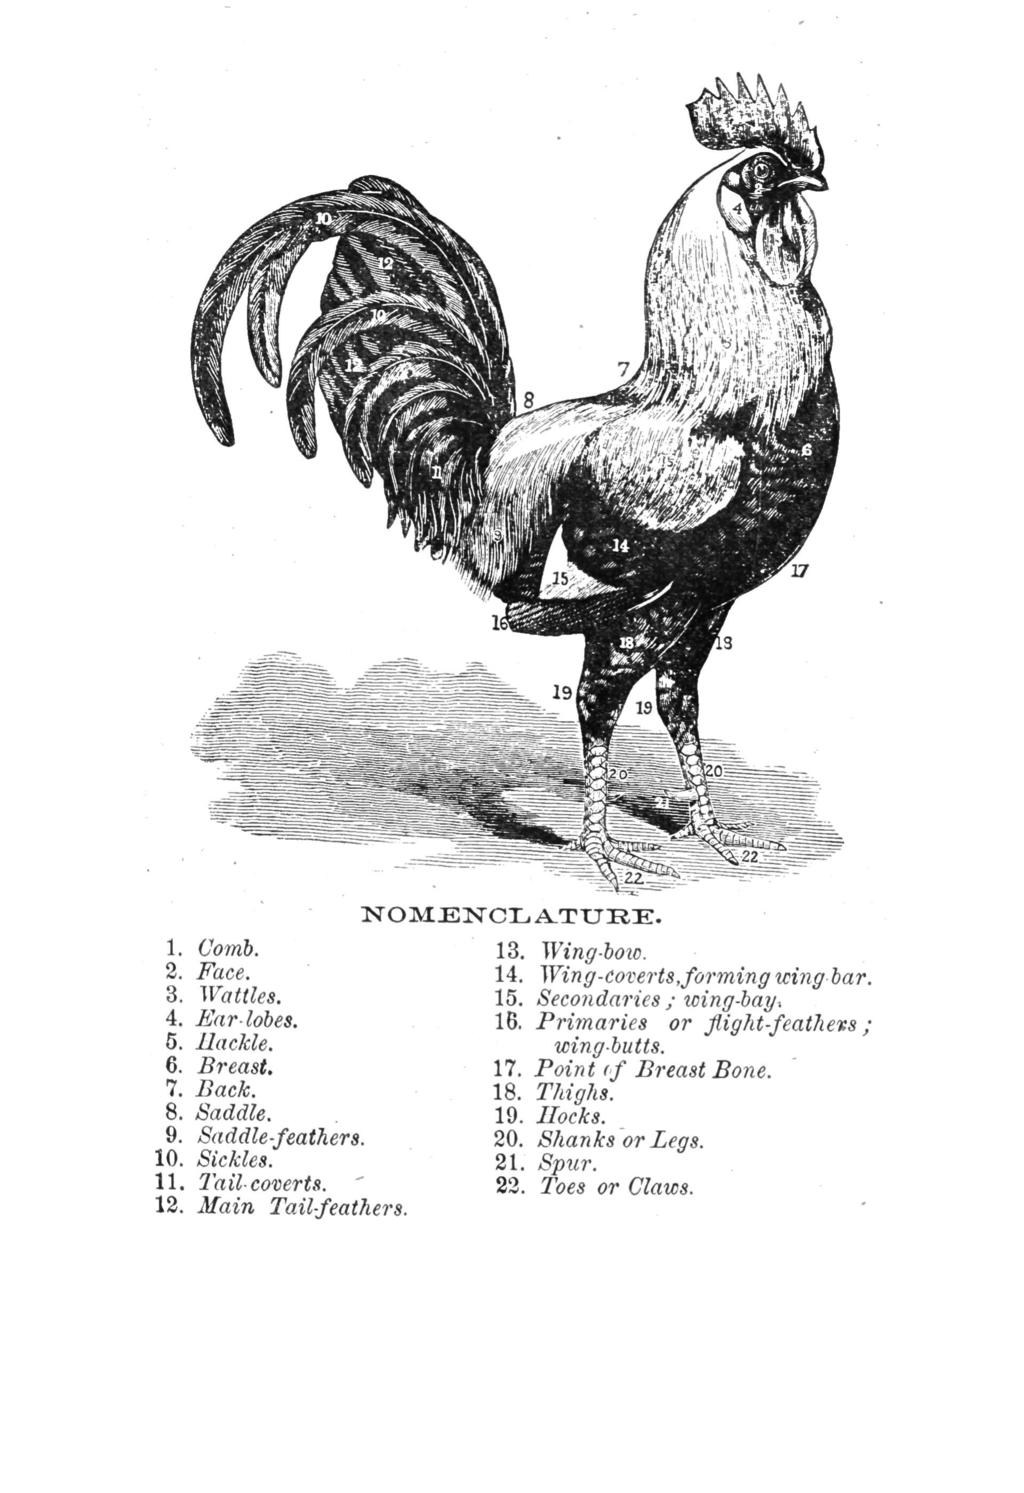 1. (Jomb. 2. Face. 3. Wattles. 4. Ear-lobes. 5. Hackle. 6. Breast. 7. Back. 8. Saddle. 9. Saddle-feathers. 10. Sickles. 11. Tail-coverts. ' 12. Main Tail-feathers. NOMENCIj A.TXJRE. 13. Wing-bow. 14.